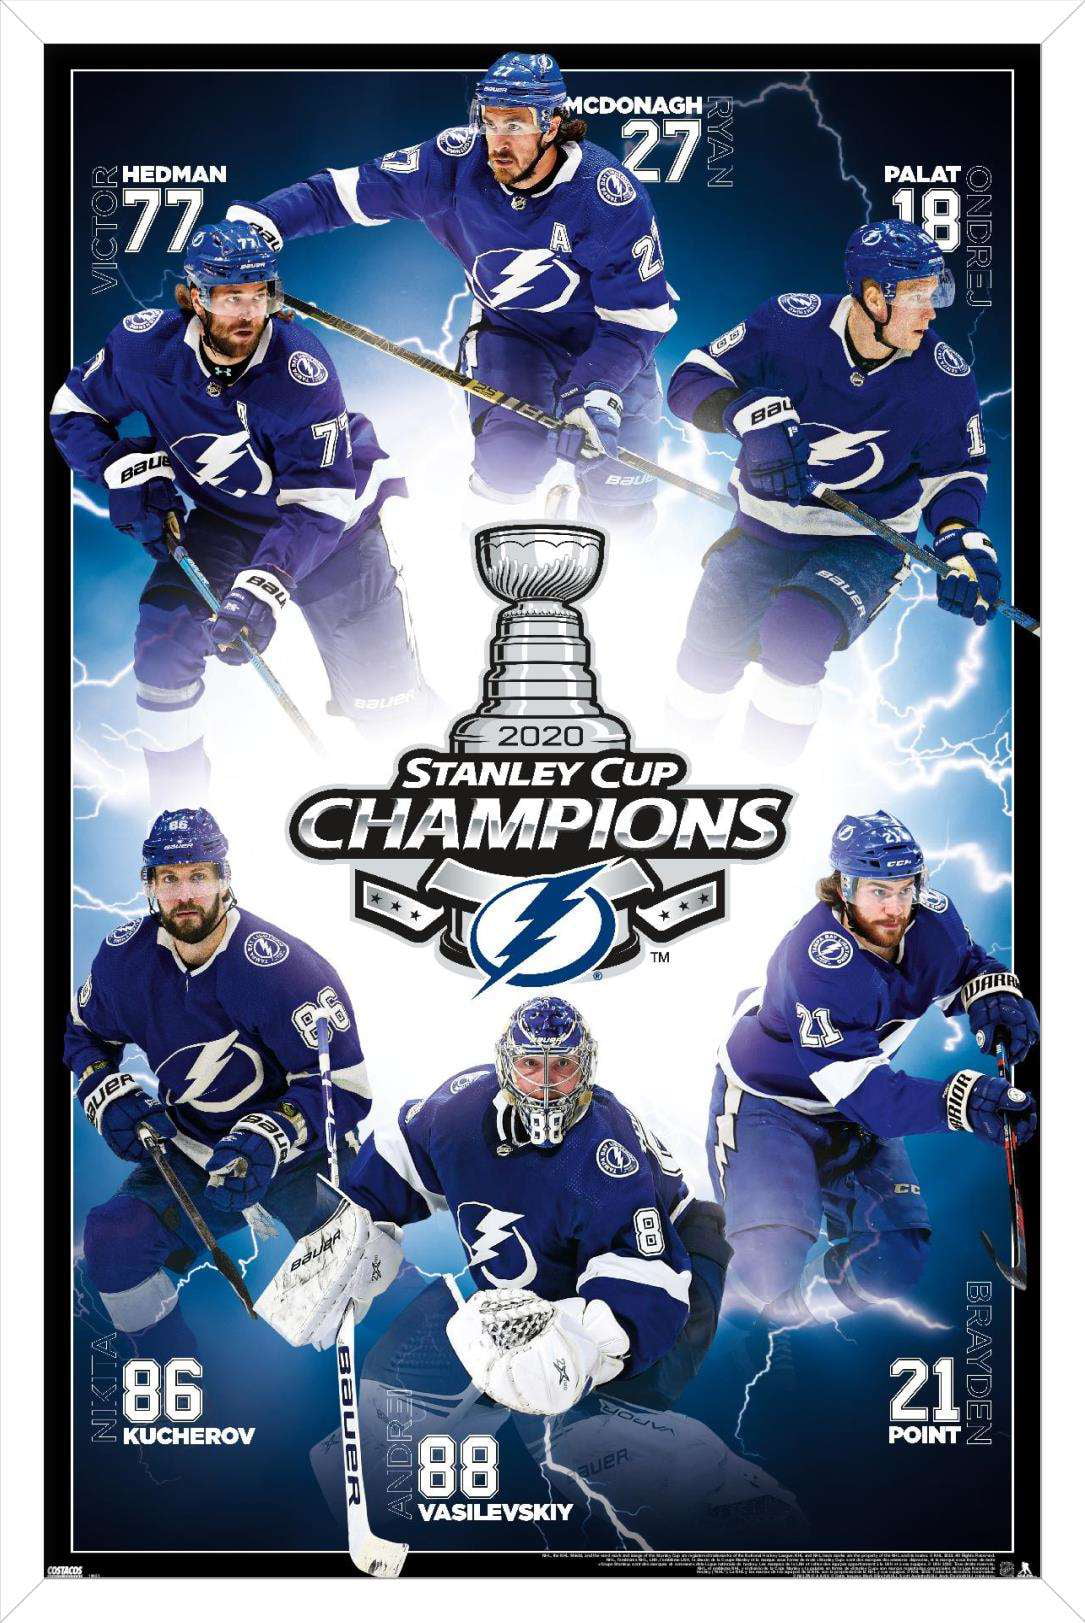 Tampa Bay Lightning: Stanley Championship Banner - NHL Removable Wall Adhesive Wall Decal Giant Cup 43W x 42H